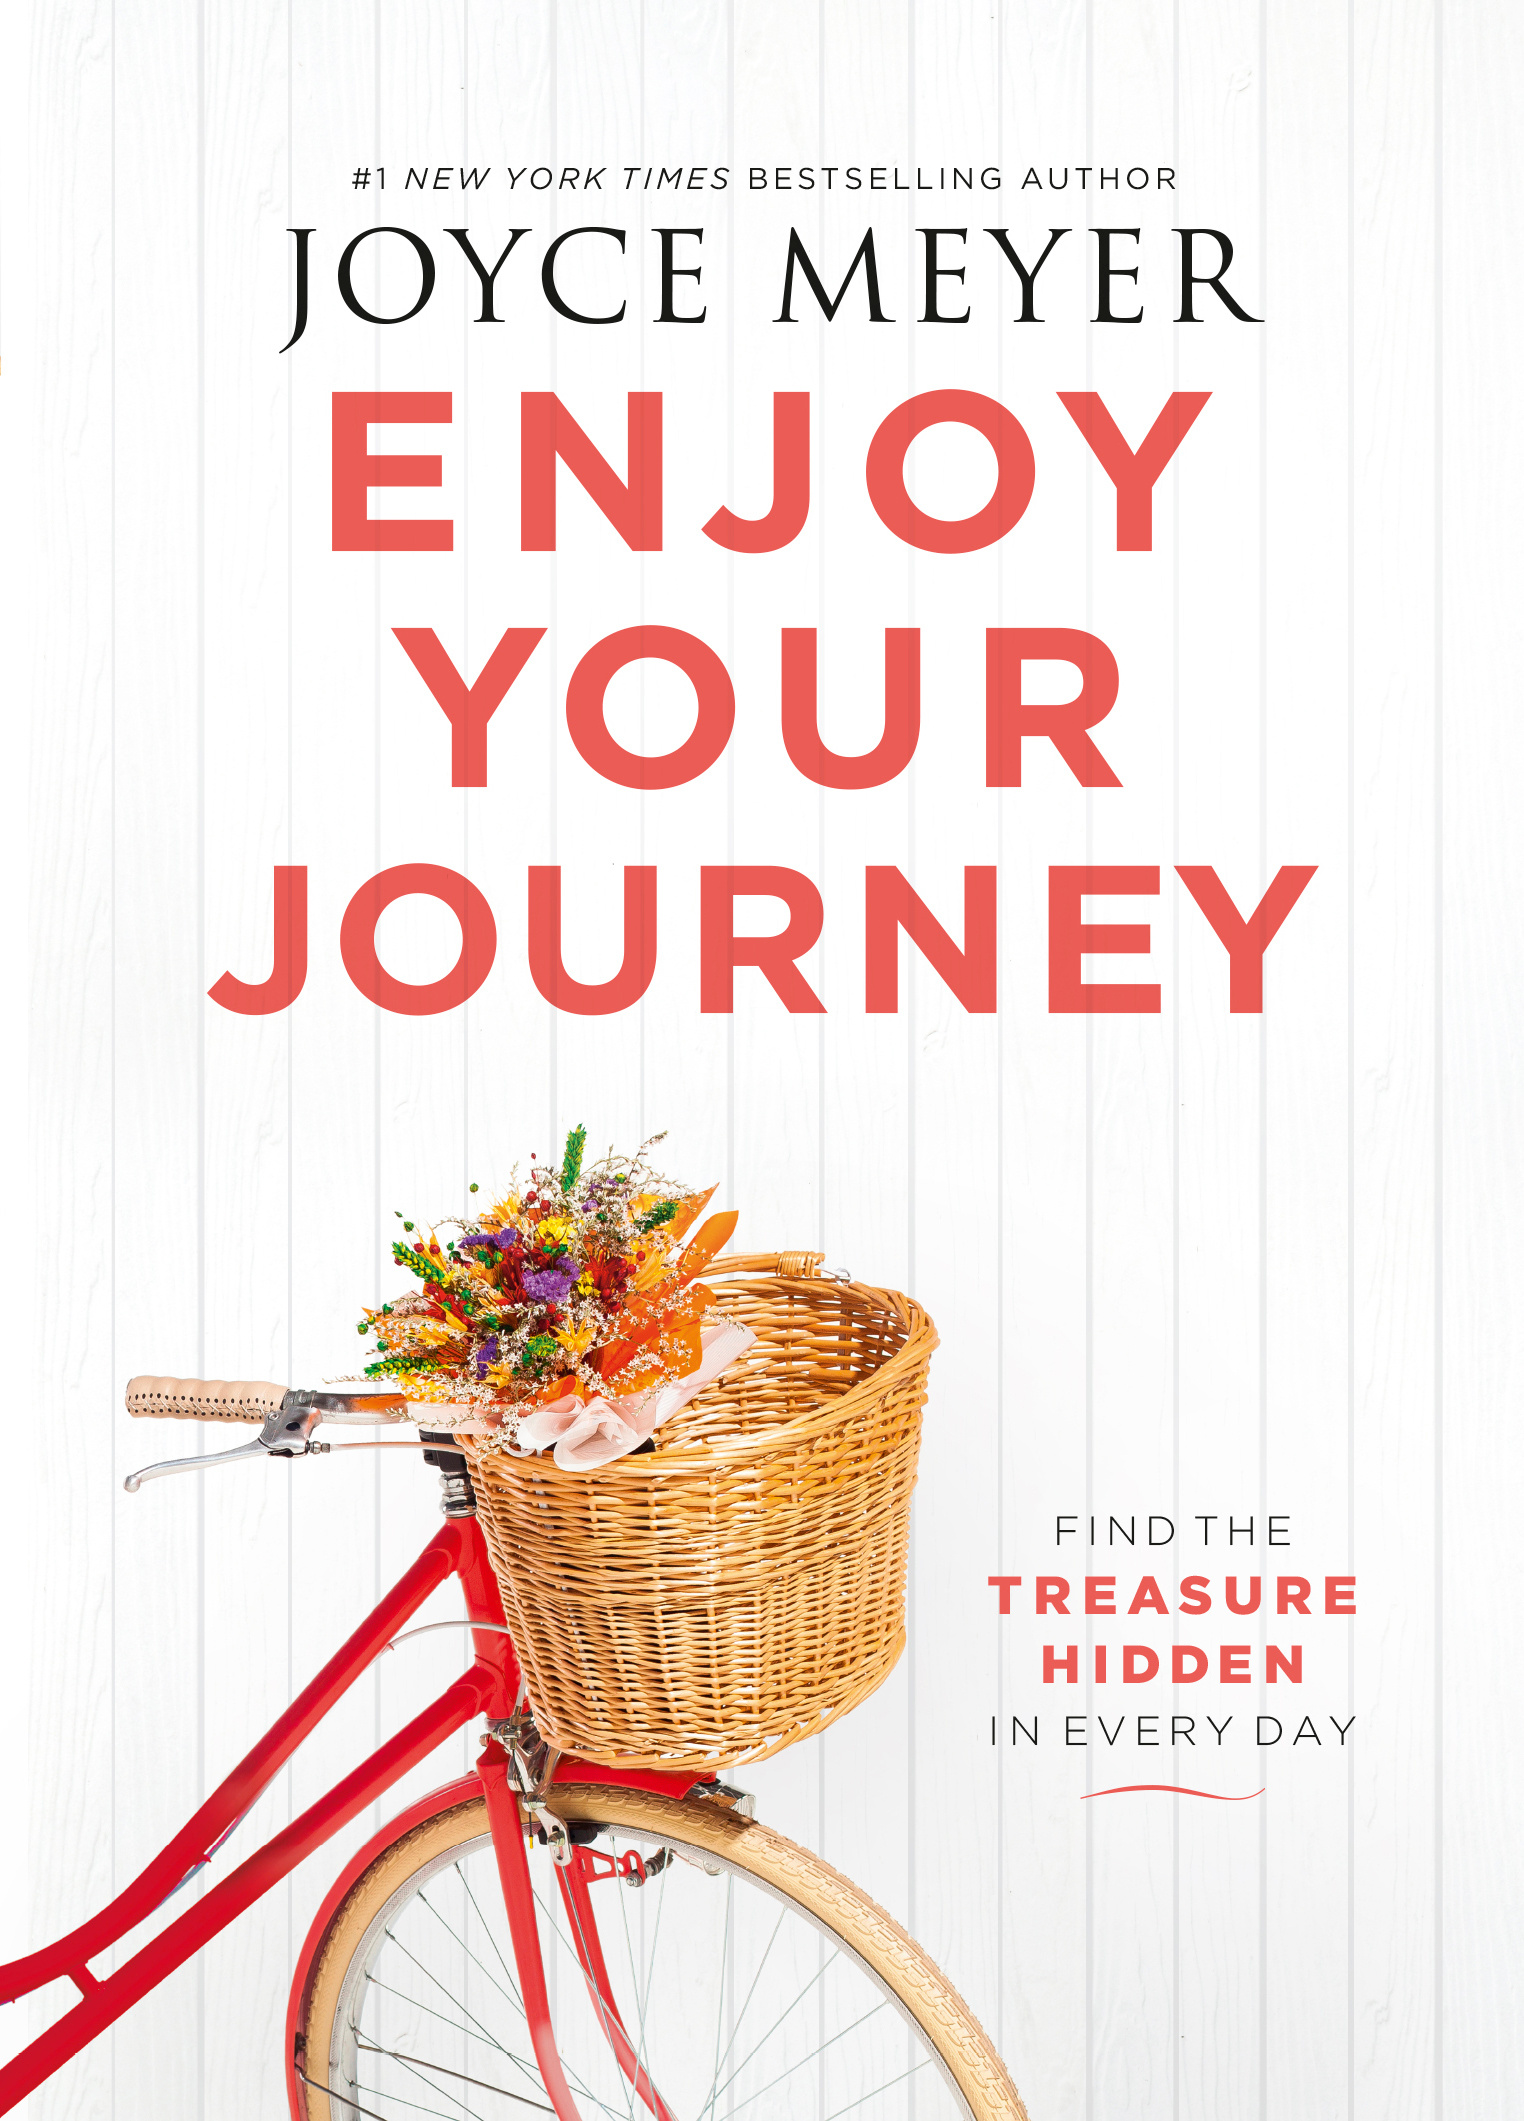 More information on Enjoy Your Journey